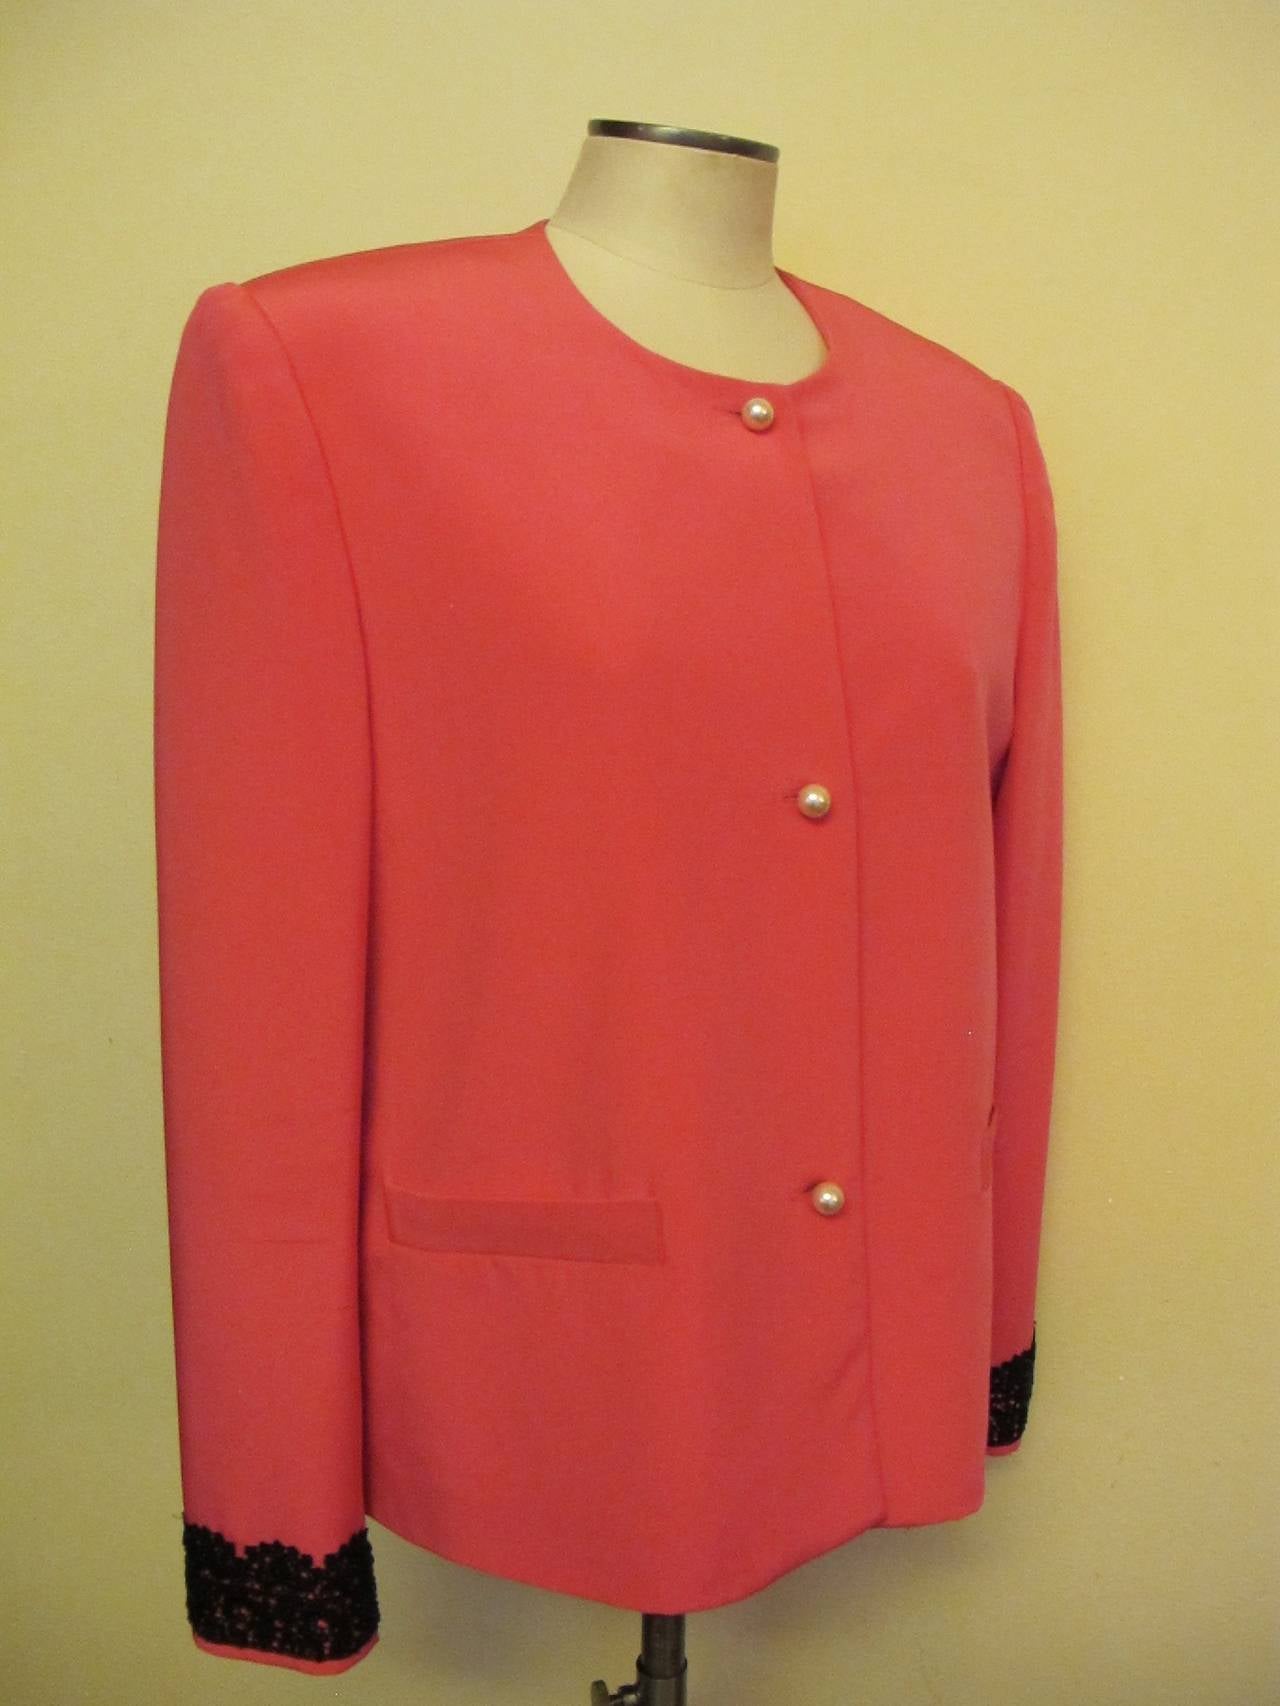 Sylvia Hind 2000 Shocking Pink Silk Cocktail Jacket and Matching Blouse In Excellent Condition For Sale In San Francisco, CA